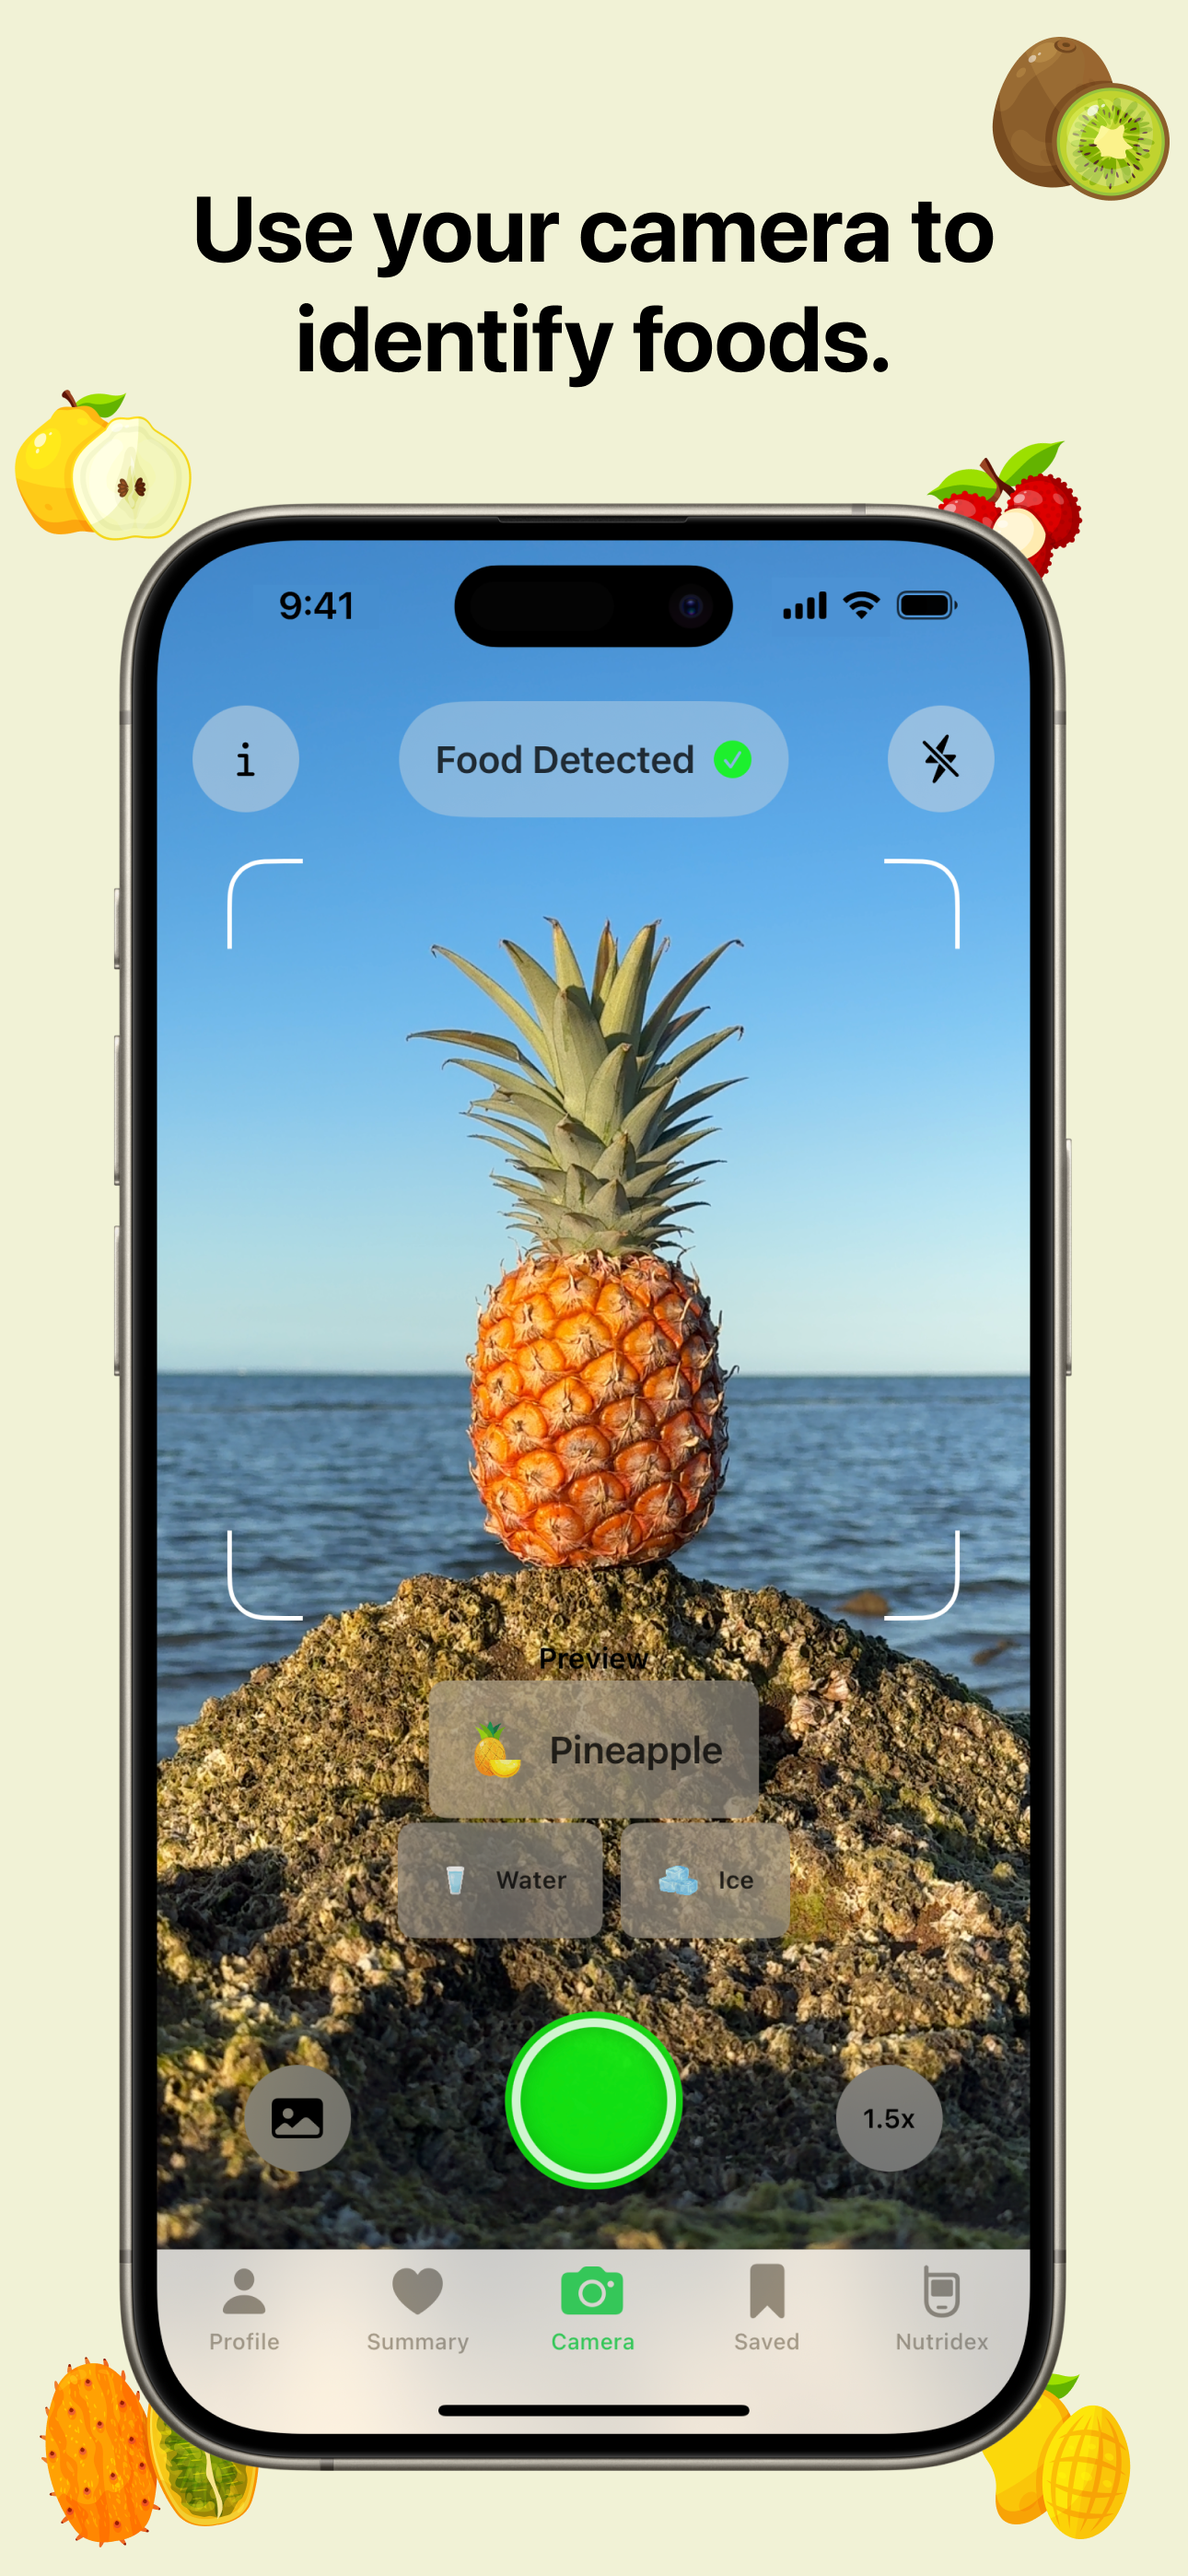 Nutrify app screenshot: A smartphone screen displaying the camera feature of a health app with the title 'Use your camera to identify foods.' The camera is focused on a pineapple placed on a rock by the sea. The app has detected the food and labeled it 'Pineapple.' Options for 'Water' and 'Ice' are visible. The app's bottom menu includes tabs for Profile, Summary, Camera, Saved, and Nutridex. The background is light yellow with various fruit icons.